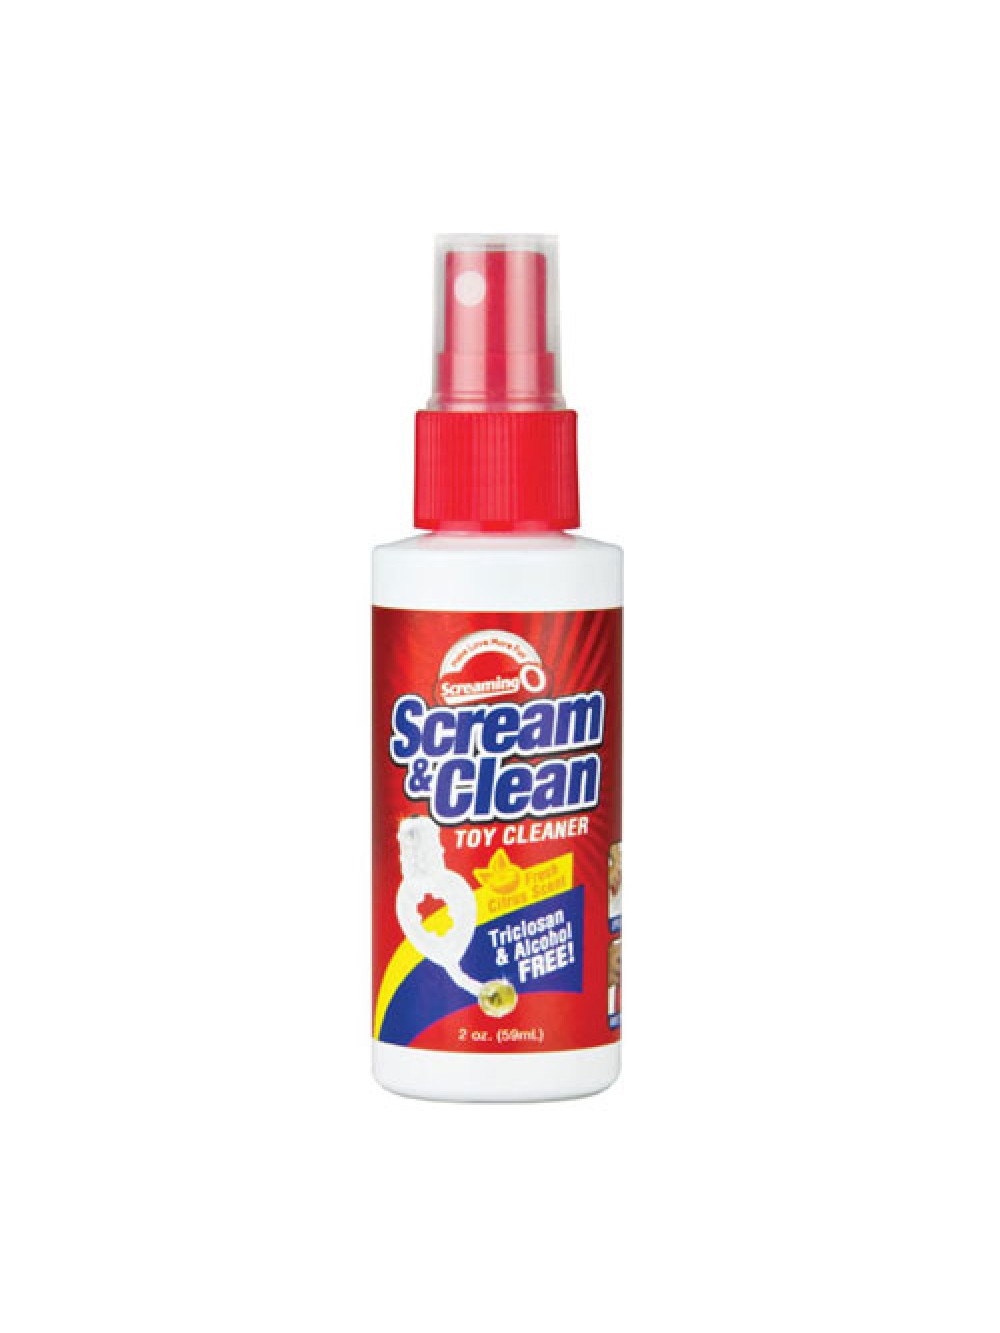 Screaming O urlare e Clean Toy Cleaner